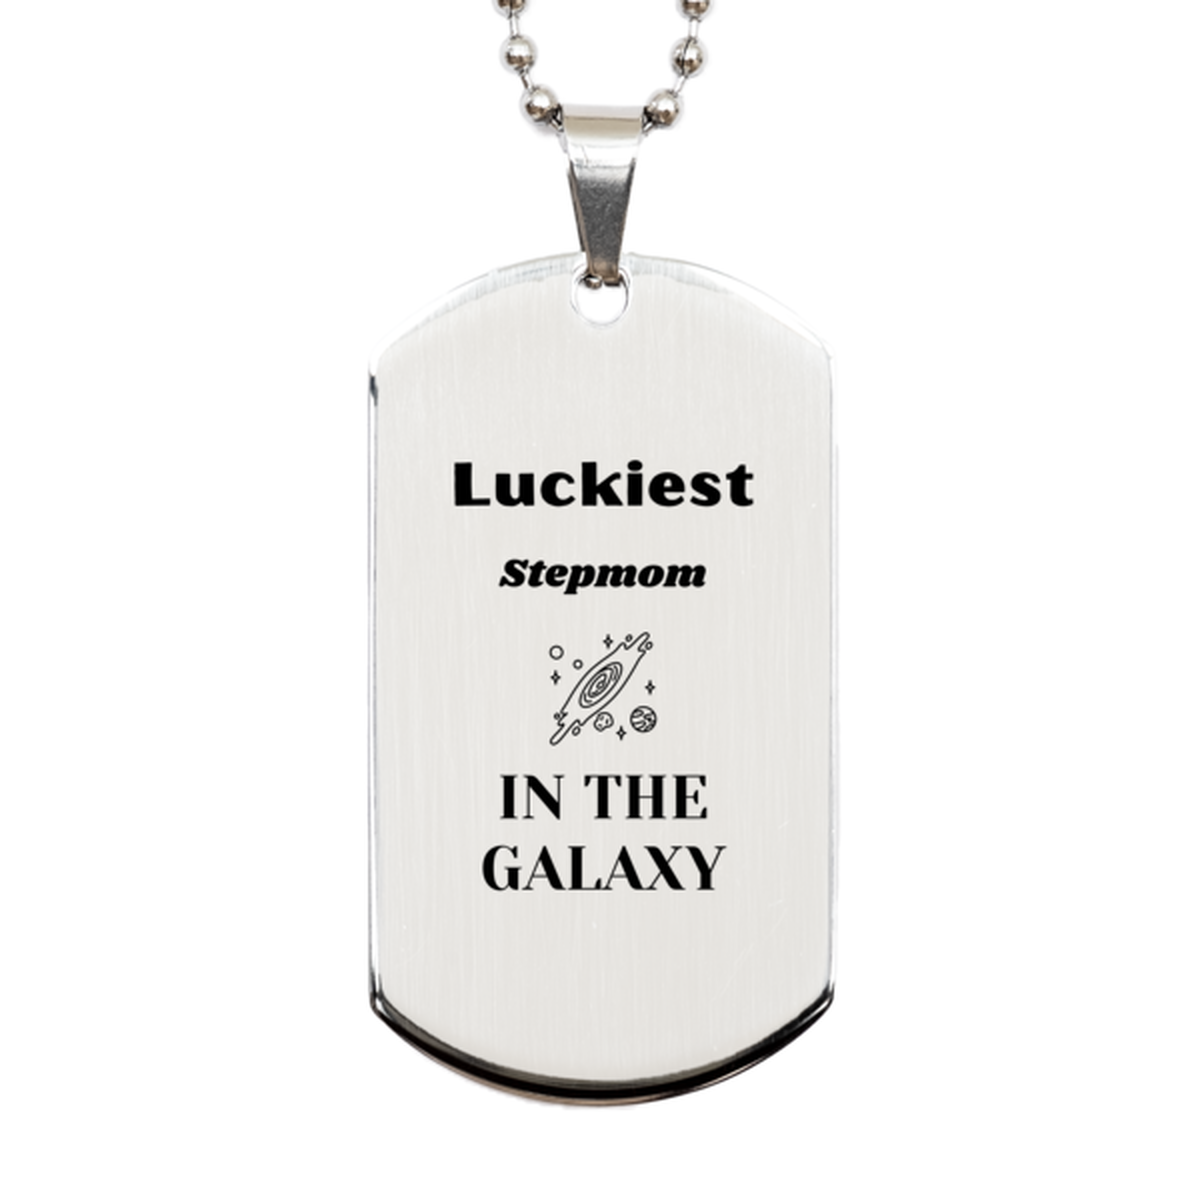 Luckiest Stepmom in the Galaxy, To My Stepmom Engraved Gifts, Christmas Stepmom Silver Dog Tag Gifts, X-mas Birthday Unique Gifts For Stepmom Men Women